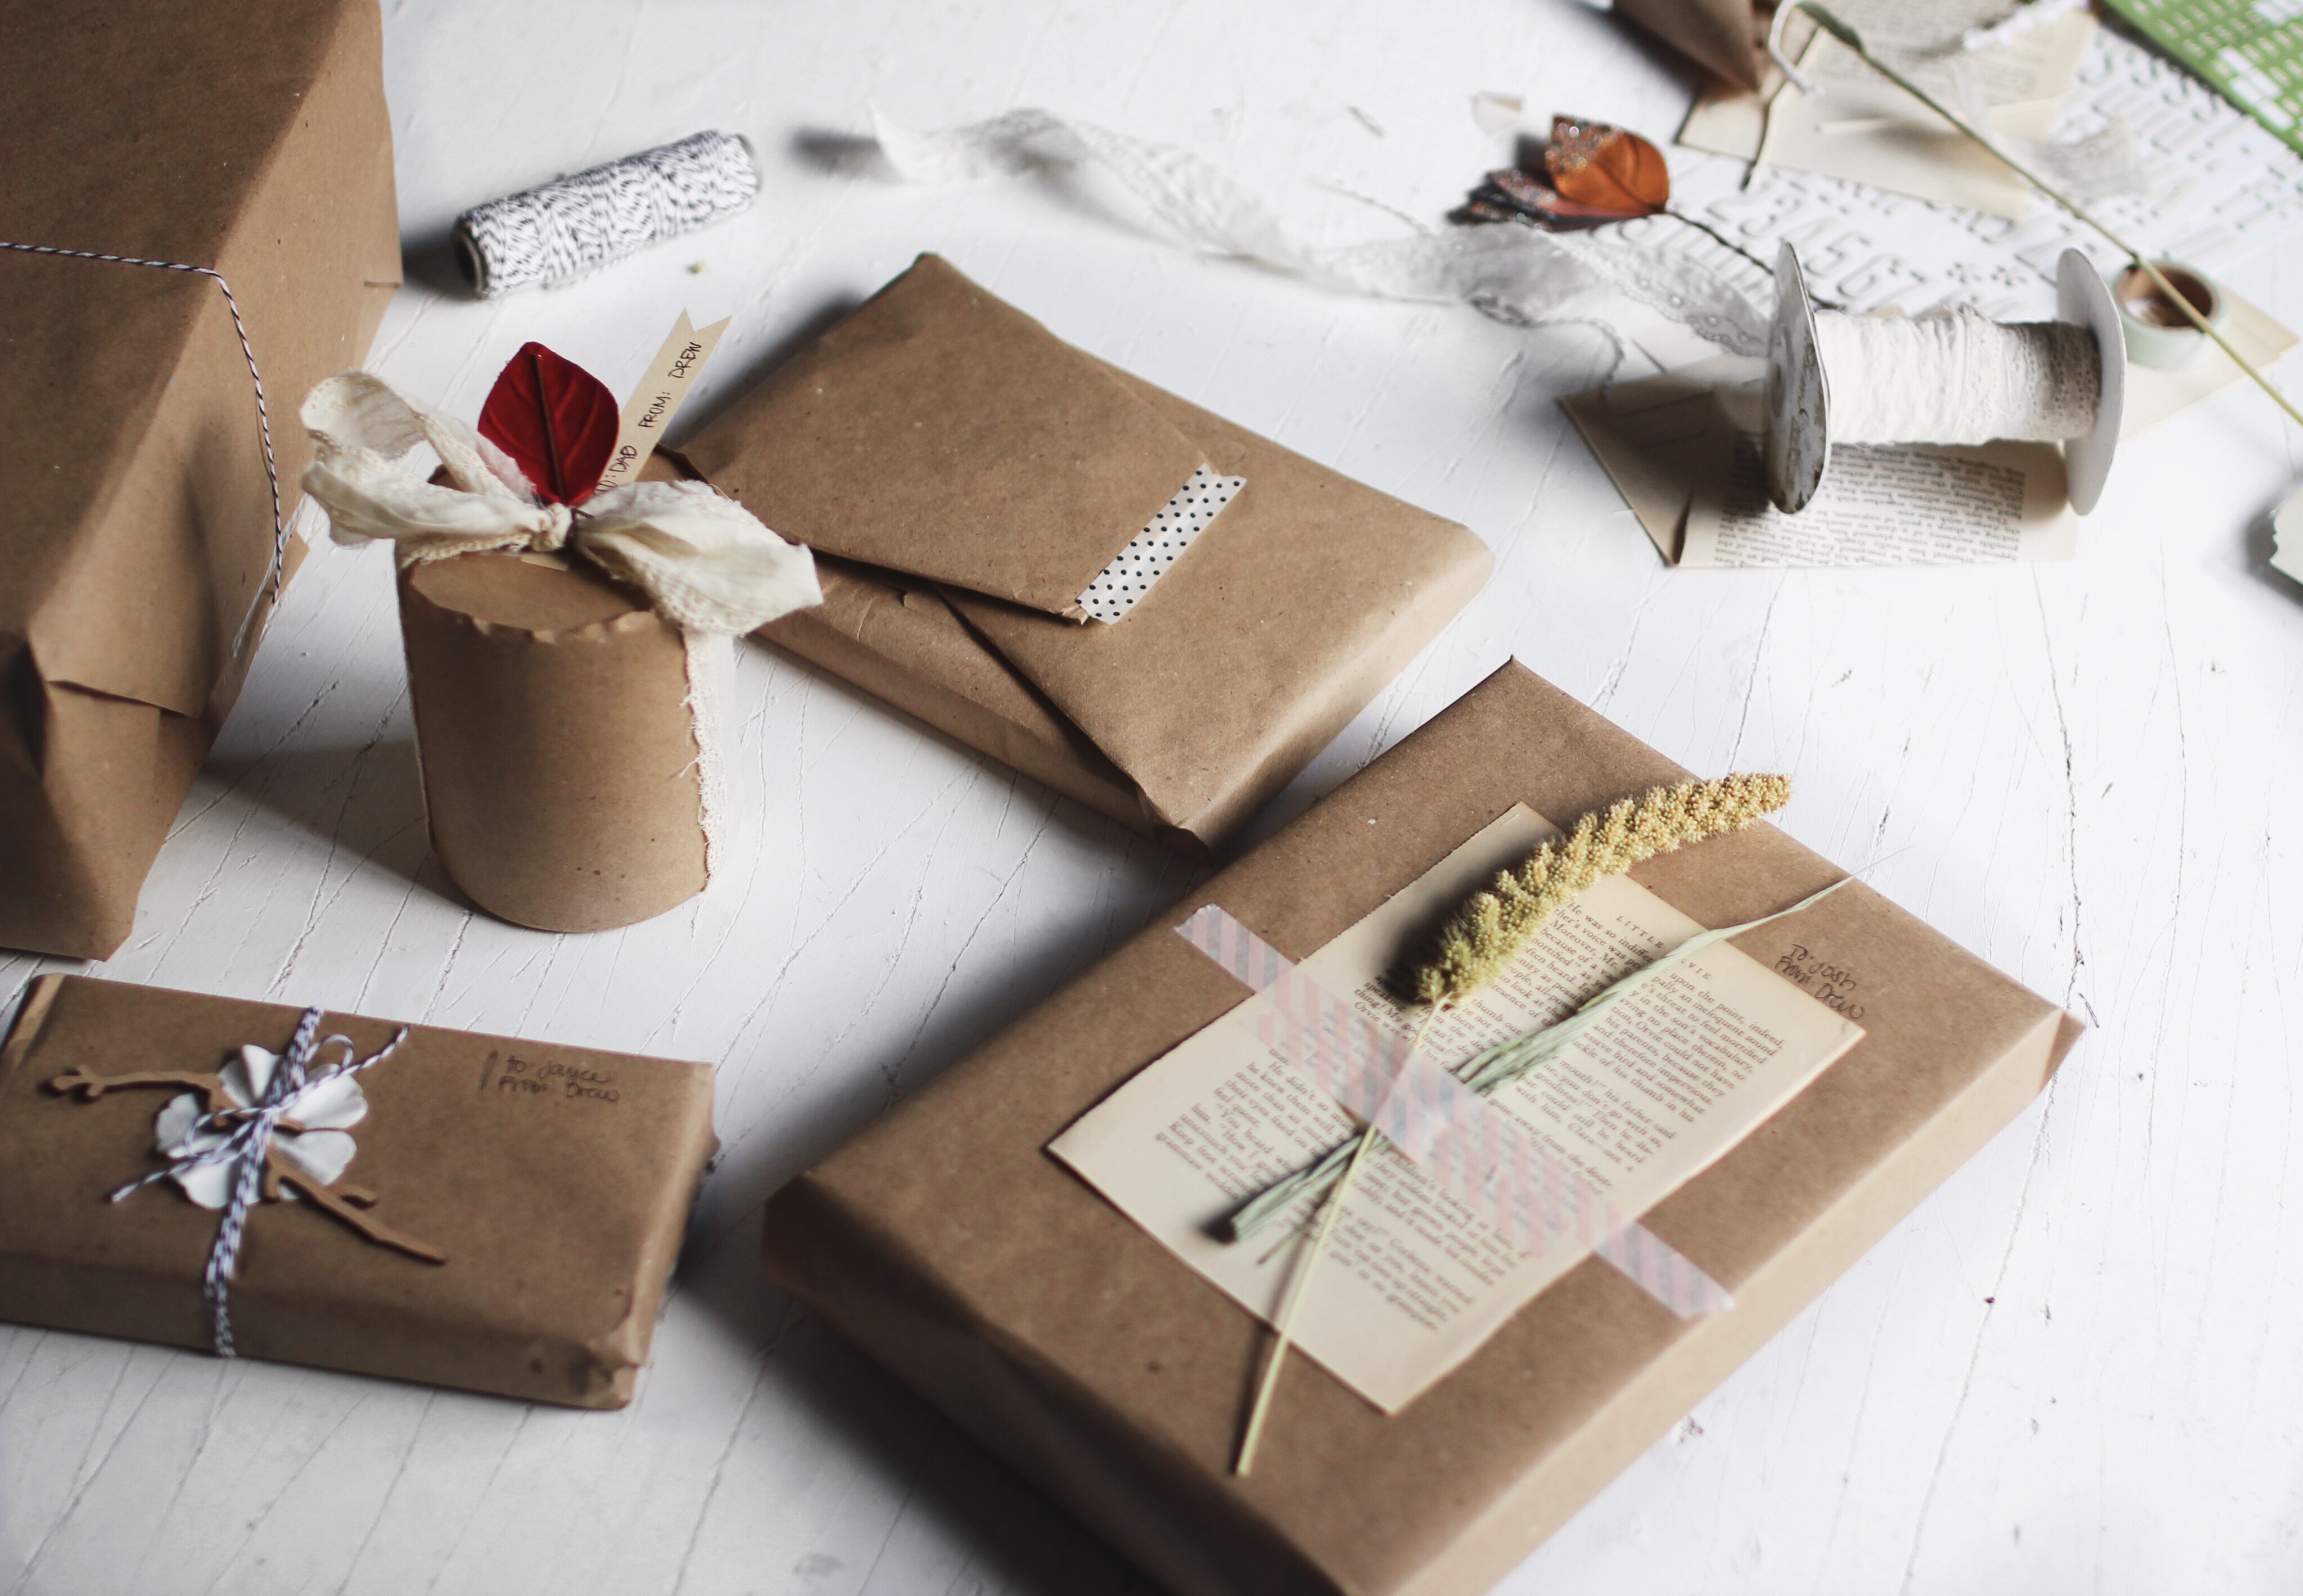 Customise it. The best Personalised Gifts this Christmas.